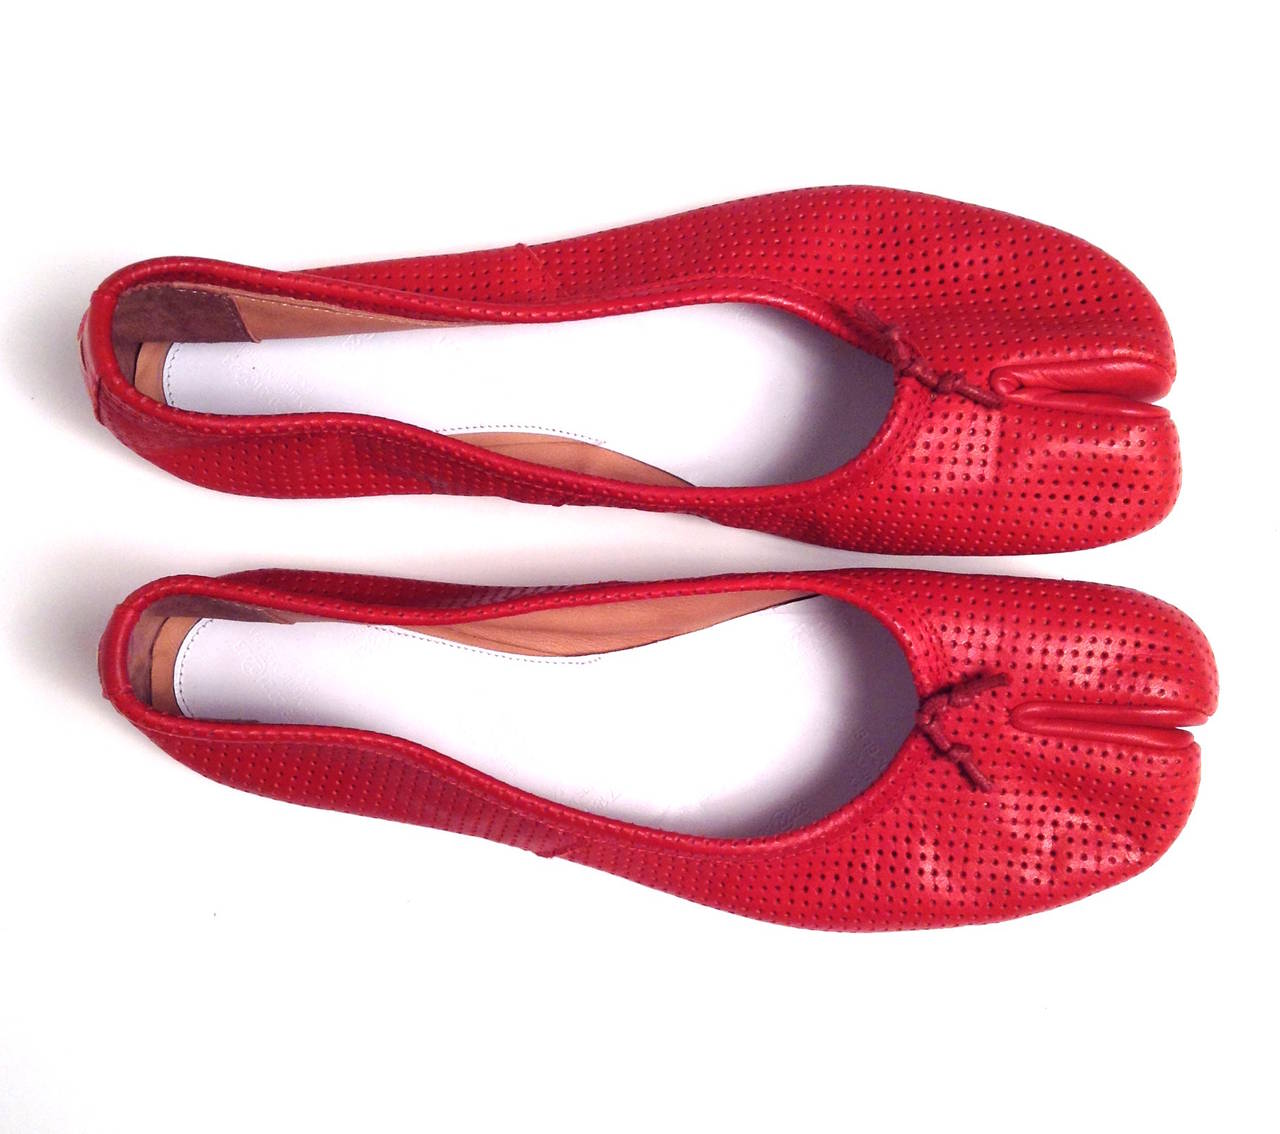 Iconic split toe tabi shoe in a warm cherry red perforated leather.

New and unworn condition.

Comes with individual Margiela shoe bags. Original retail $645